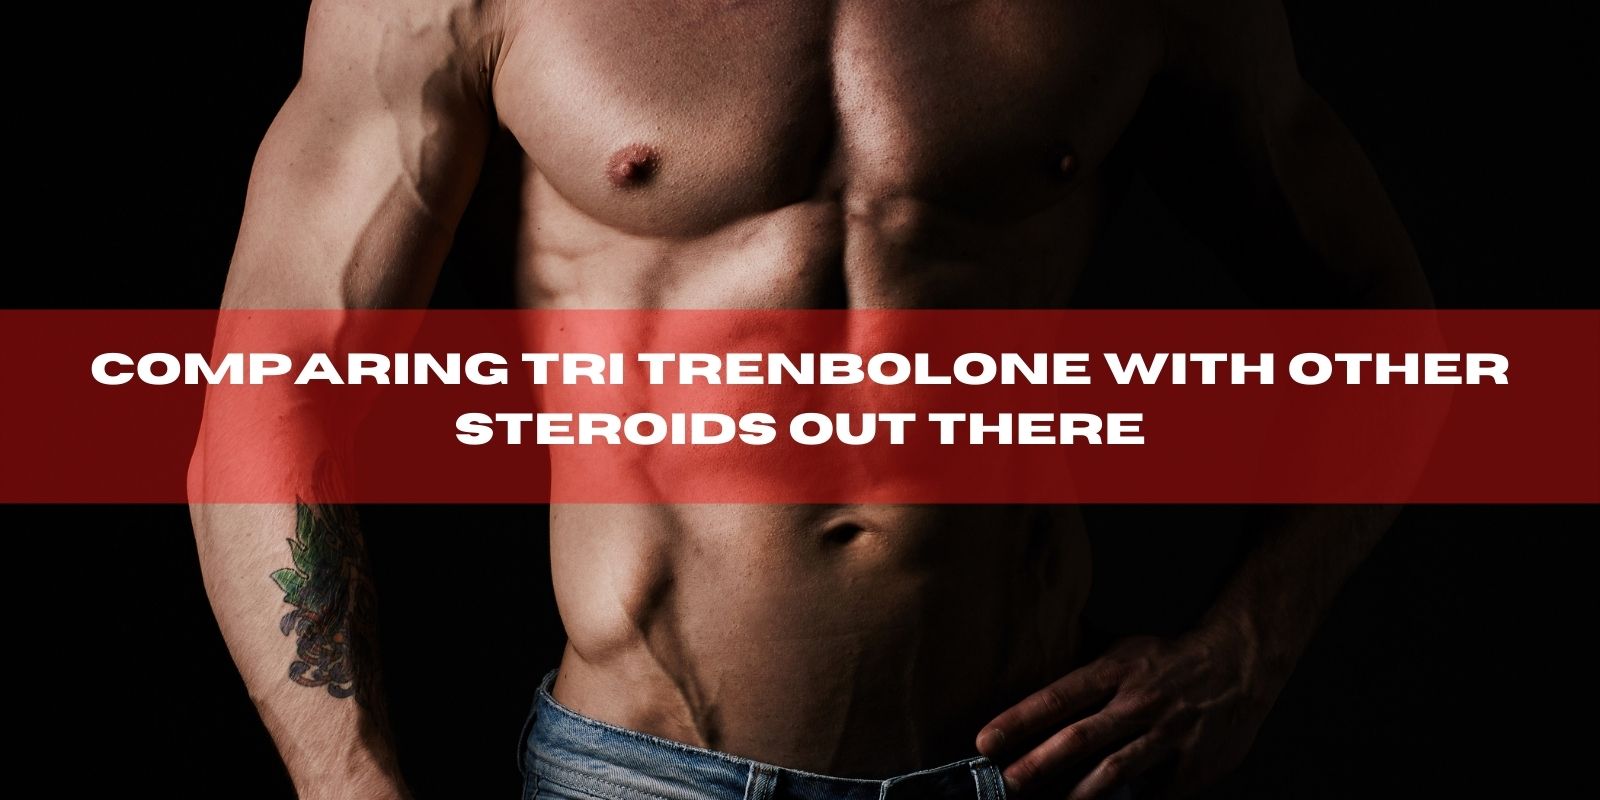 Comparing Tri Trenbolone with Other Steroids Out There